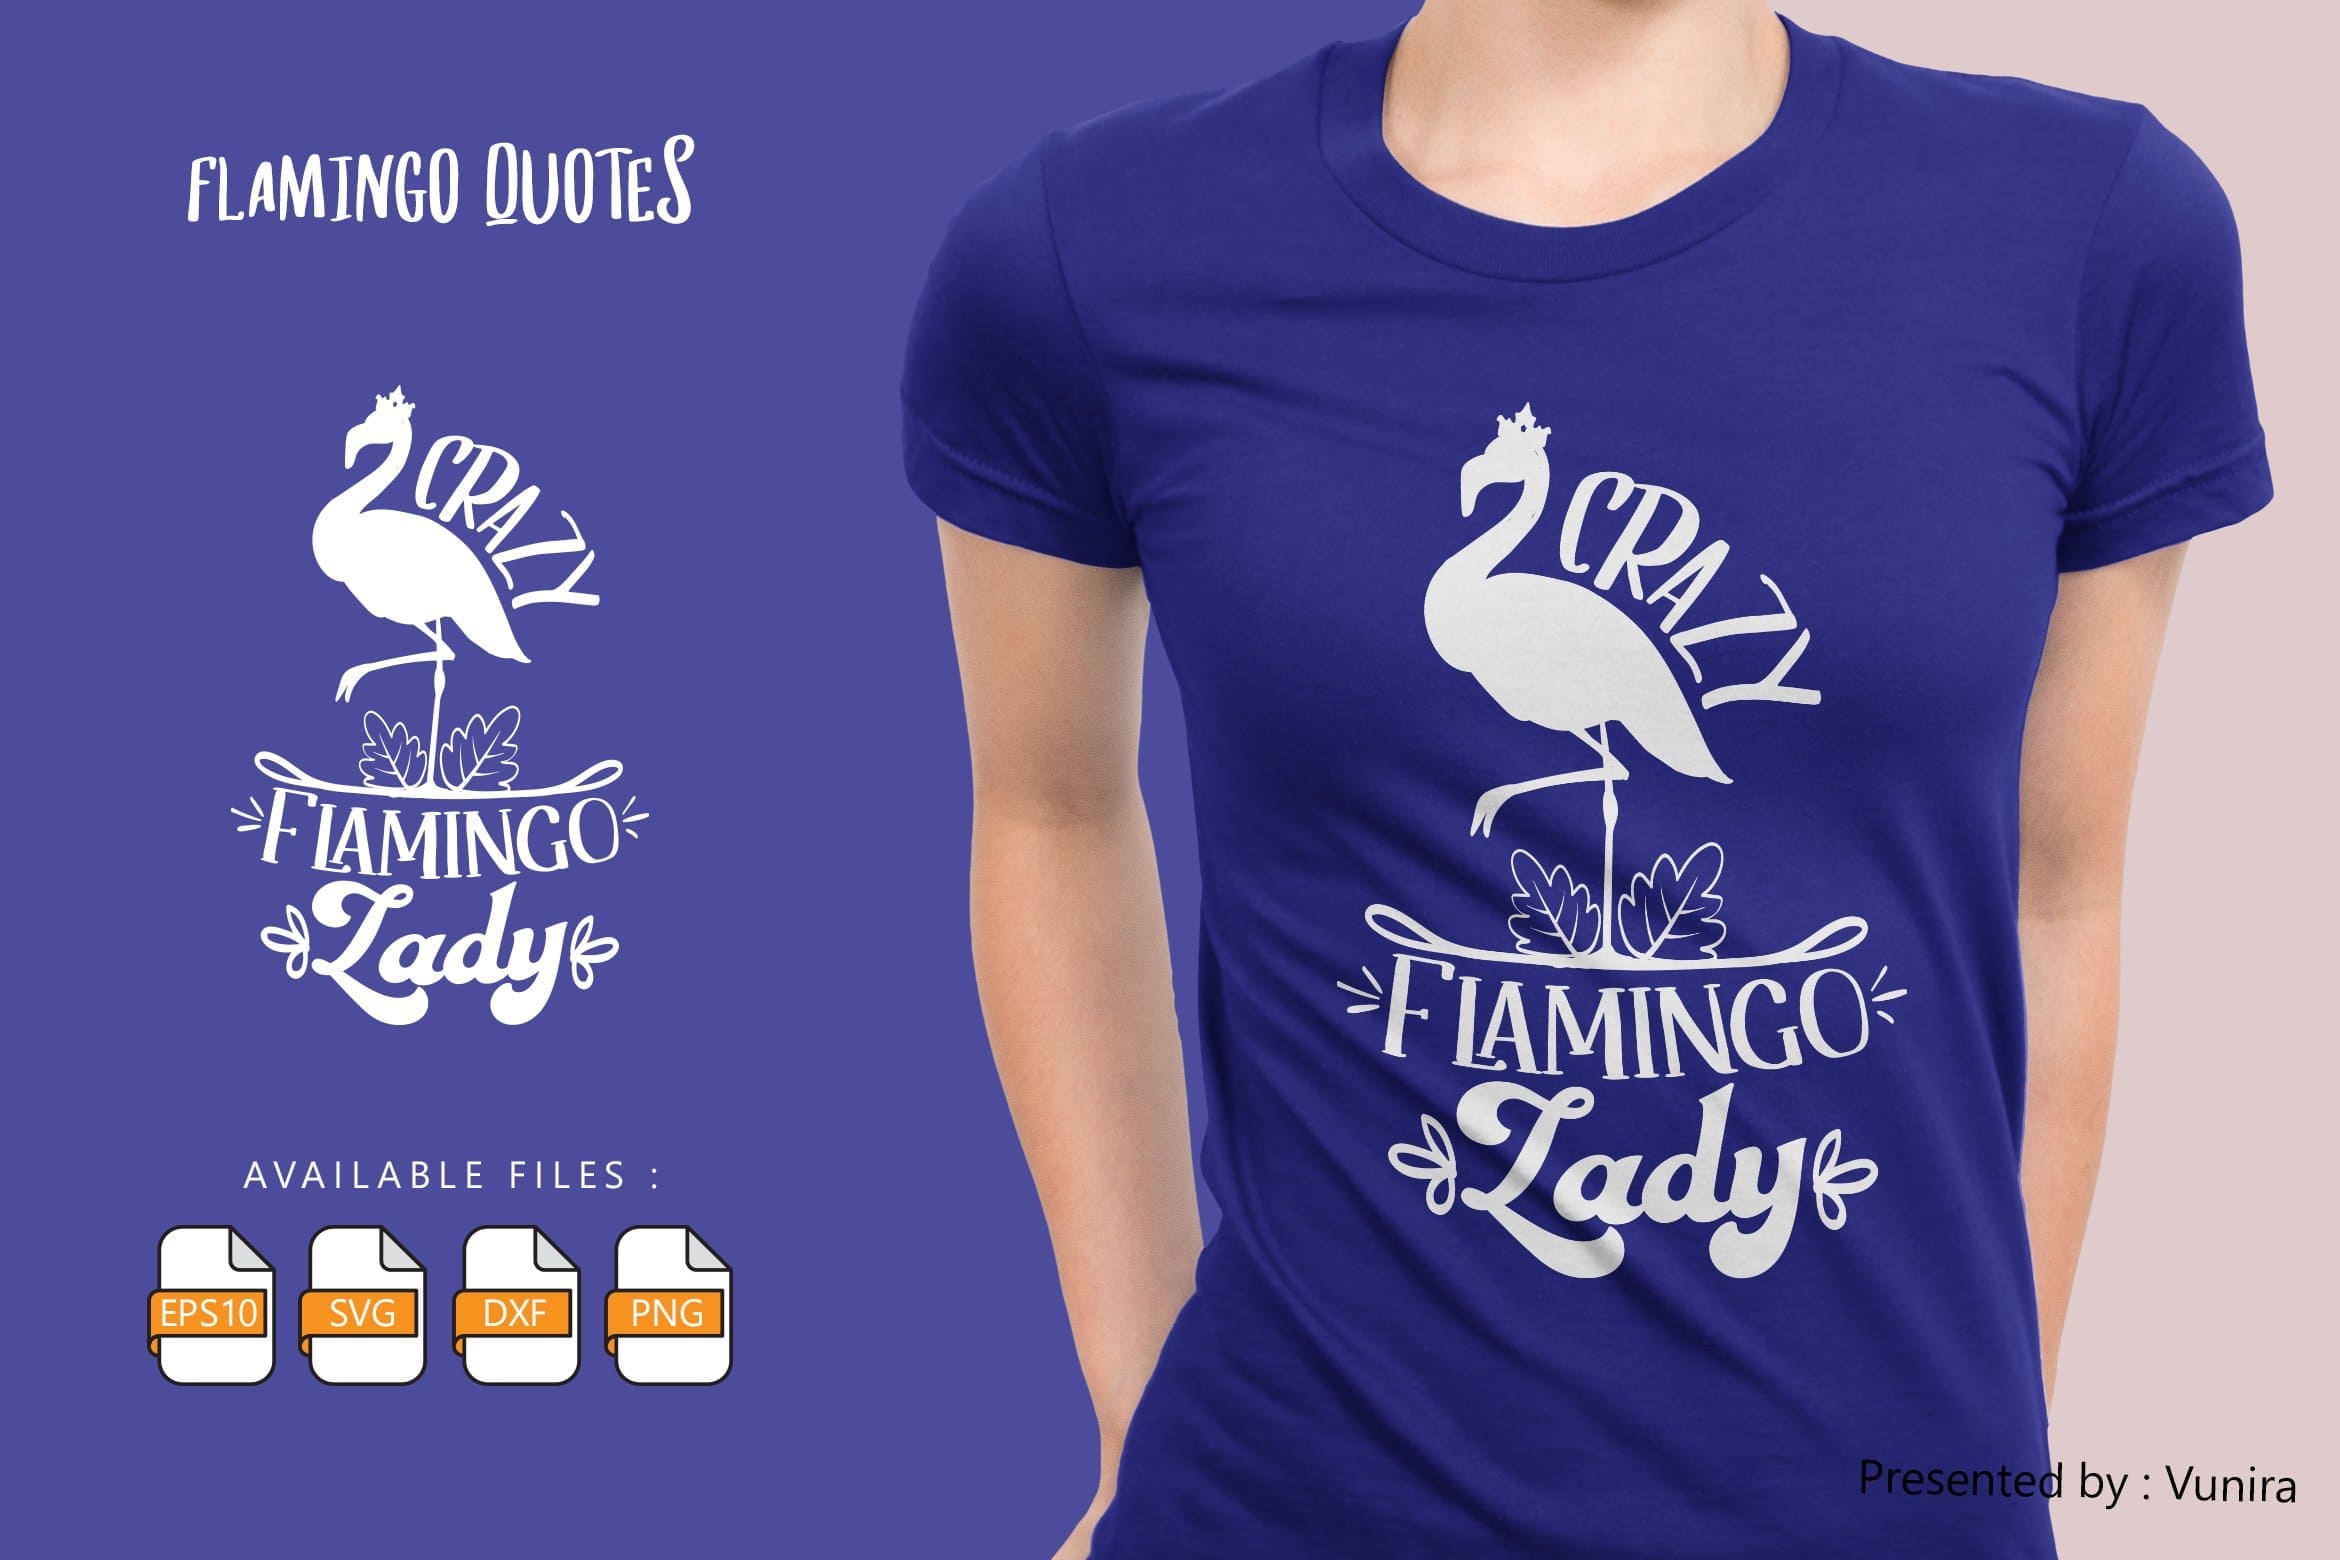 Crazy flamingo lady lettering quotes on blue background.